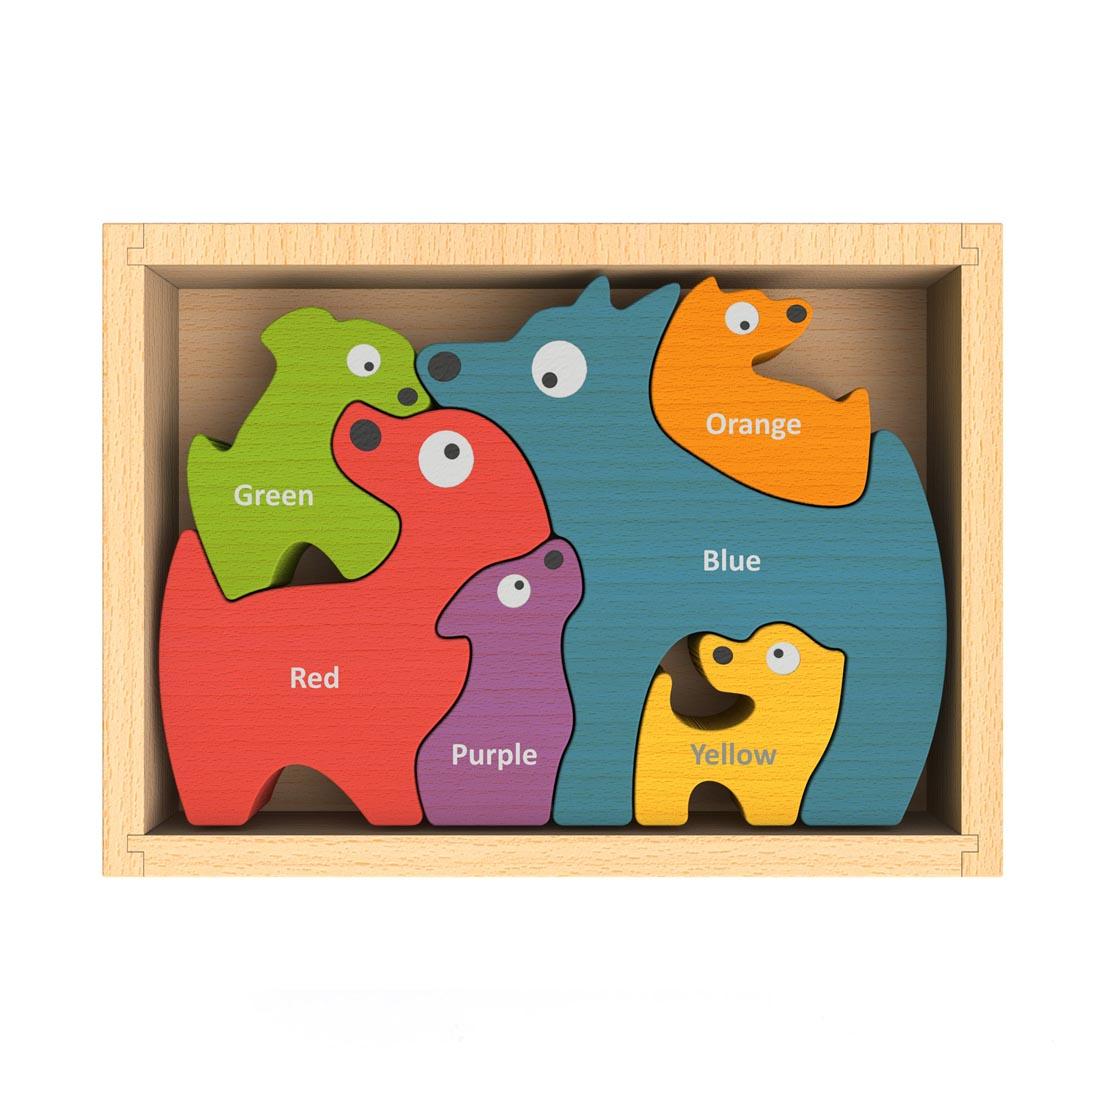 English Side of Dog Family Bilingual Color Puzzle by BeginAgain Toys